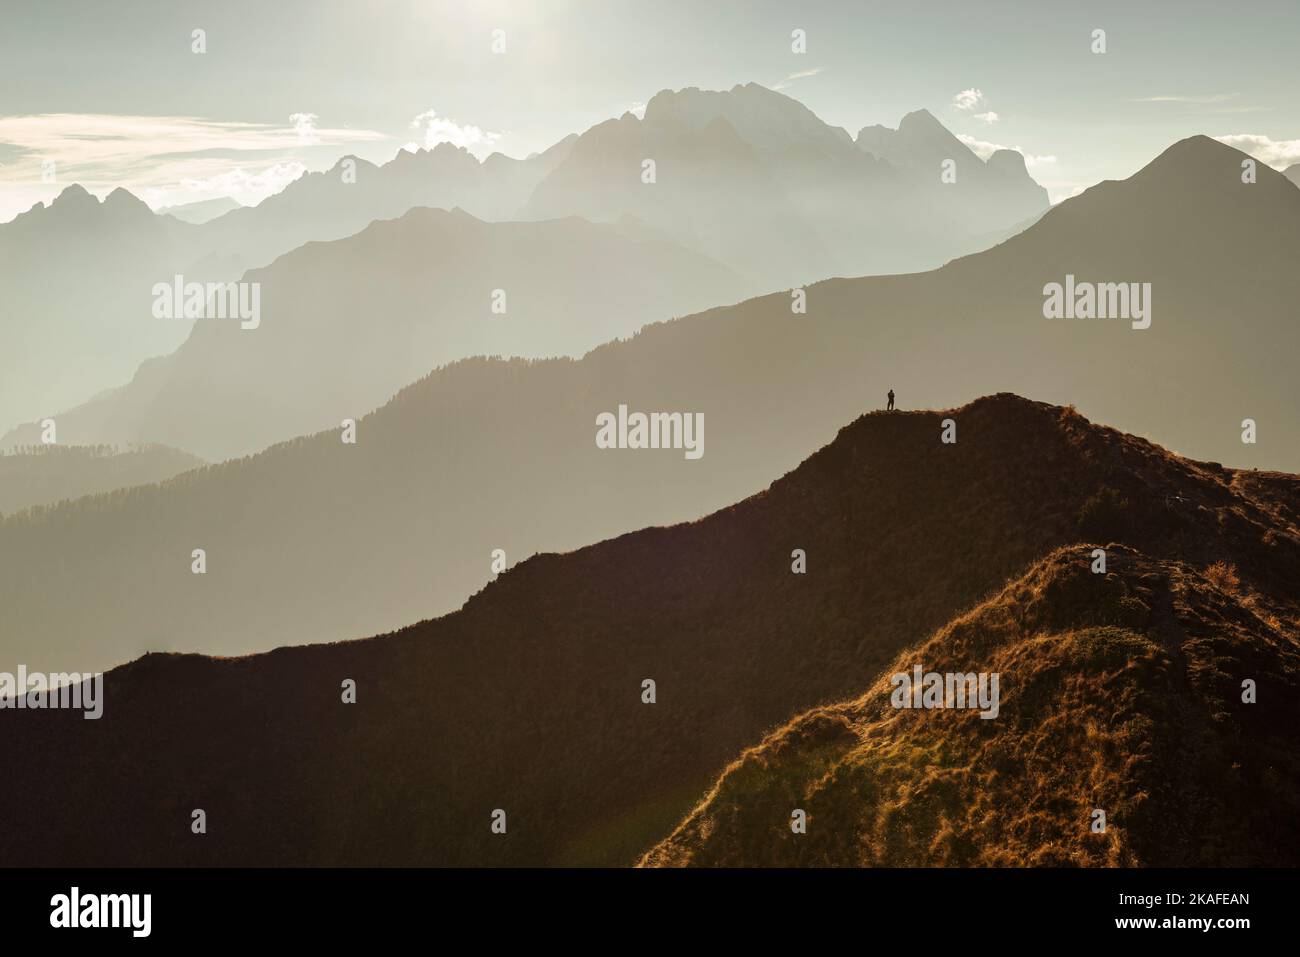 A man stands on a panoramic peak at Passo di Giau in the warm backlight in front of mountain ranges and the Mount Marmolada, Dolomites, Italy Stock Photo